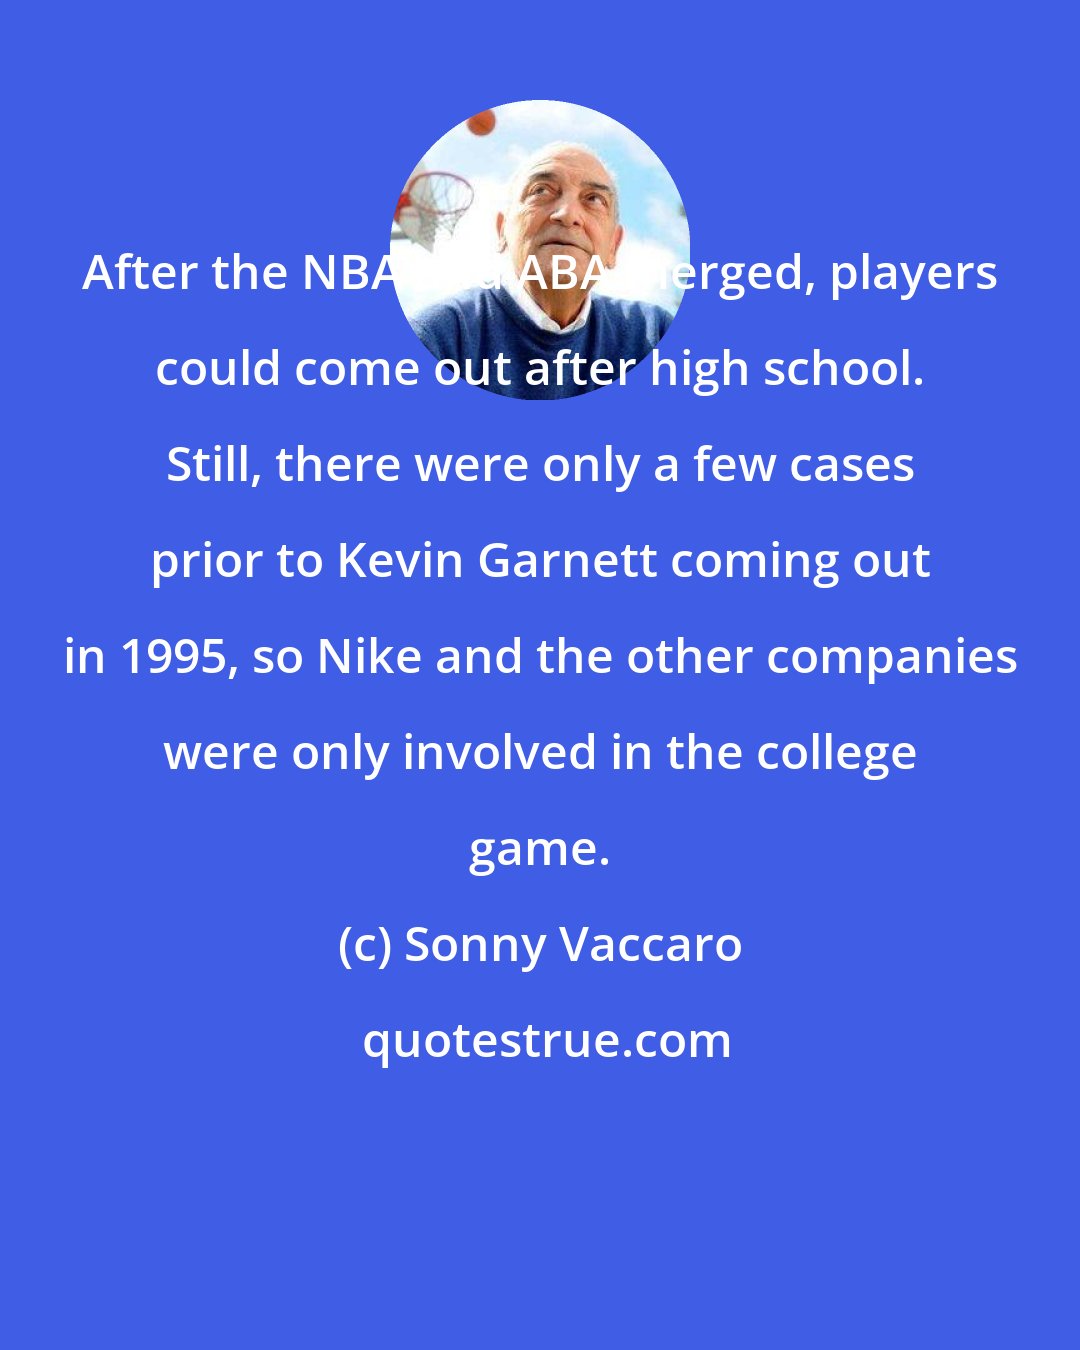 Sonny Vaccaro: After the NBA and ABA merged, players could come out after high school. Still, there were only a few cases prior to Kevin Garnett coming out in 1995, so Nike and the other companies were only involved in the college game.